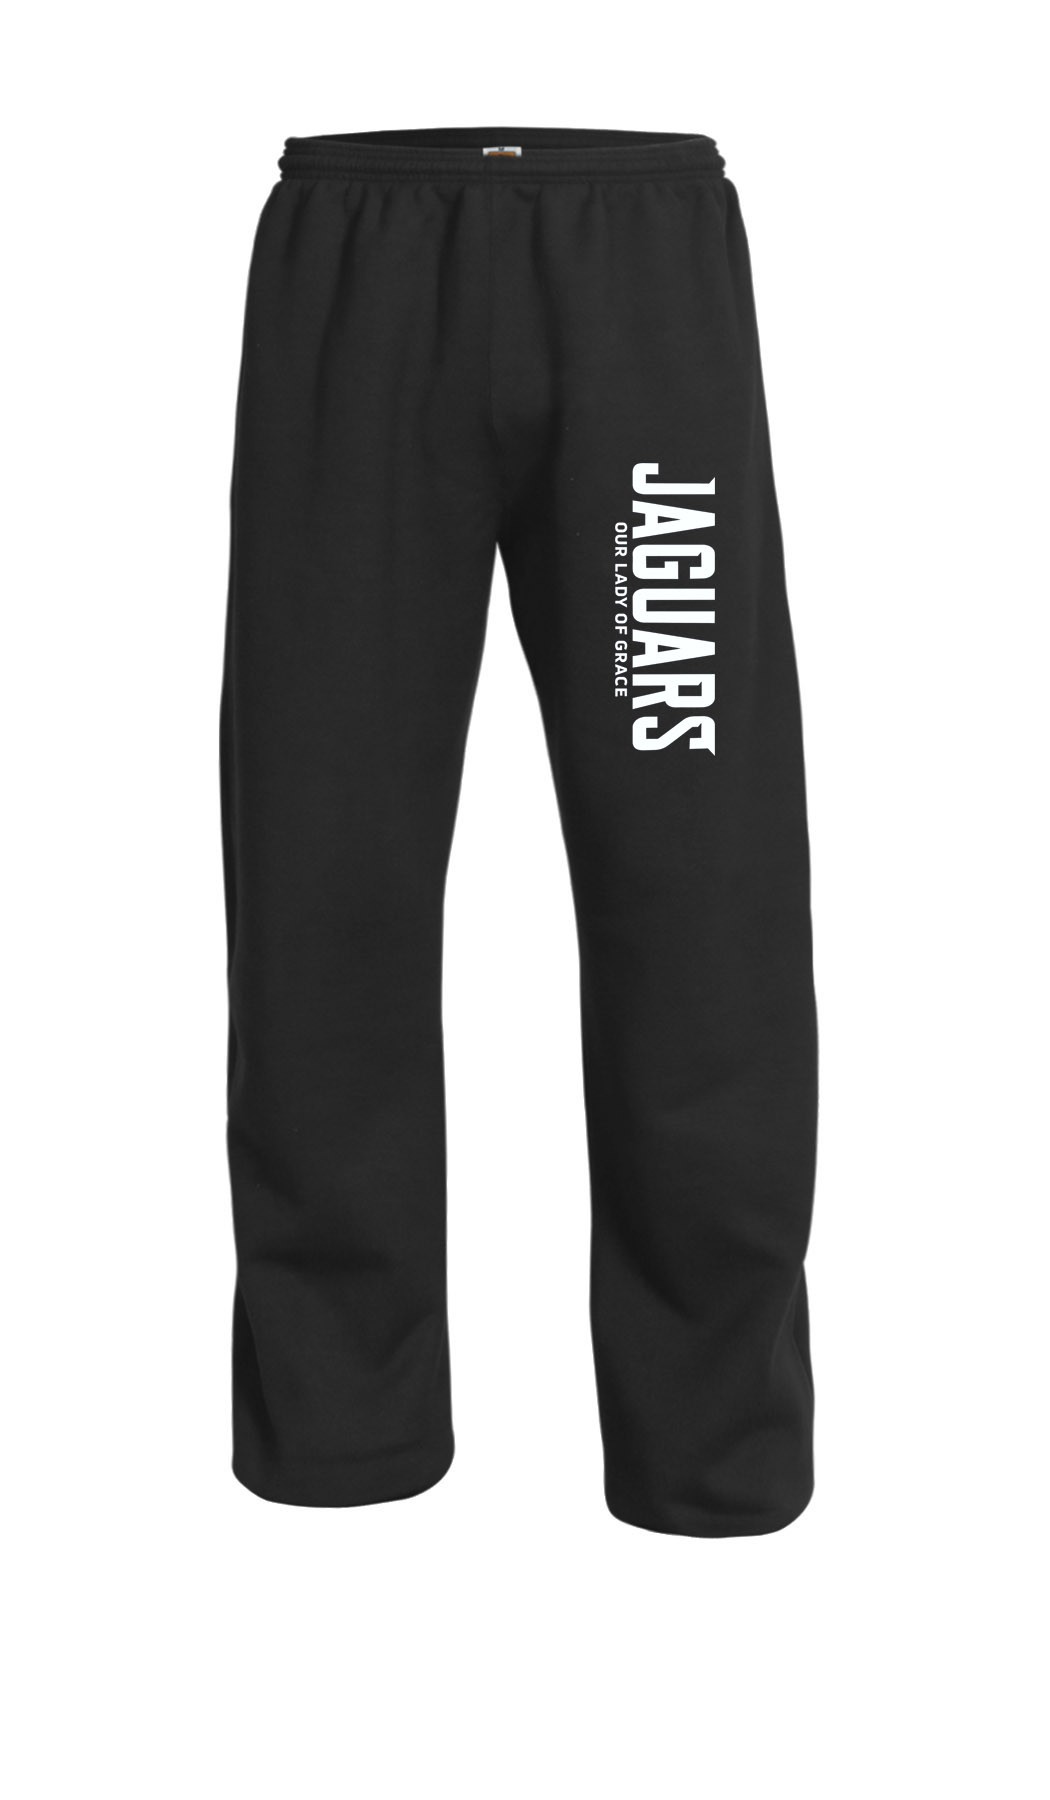 OLG Staff Non Elastic Sweat Pants w/ White Logo #F44- Please Allow 2-3 Weeks for Delivery